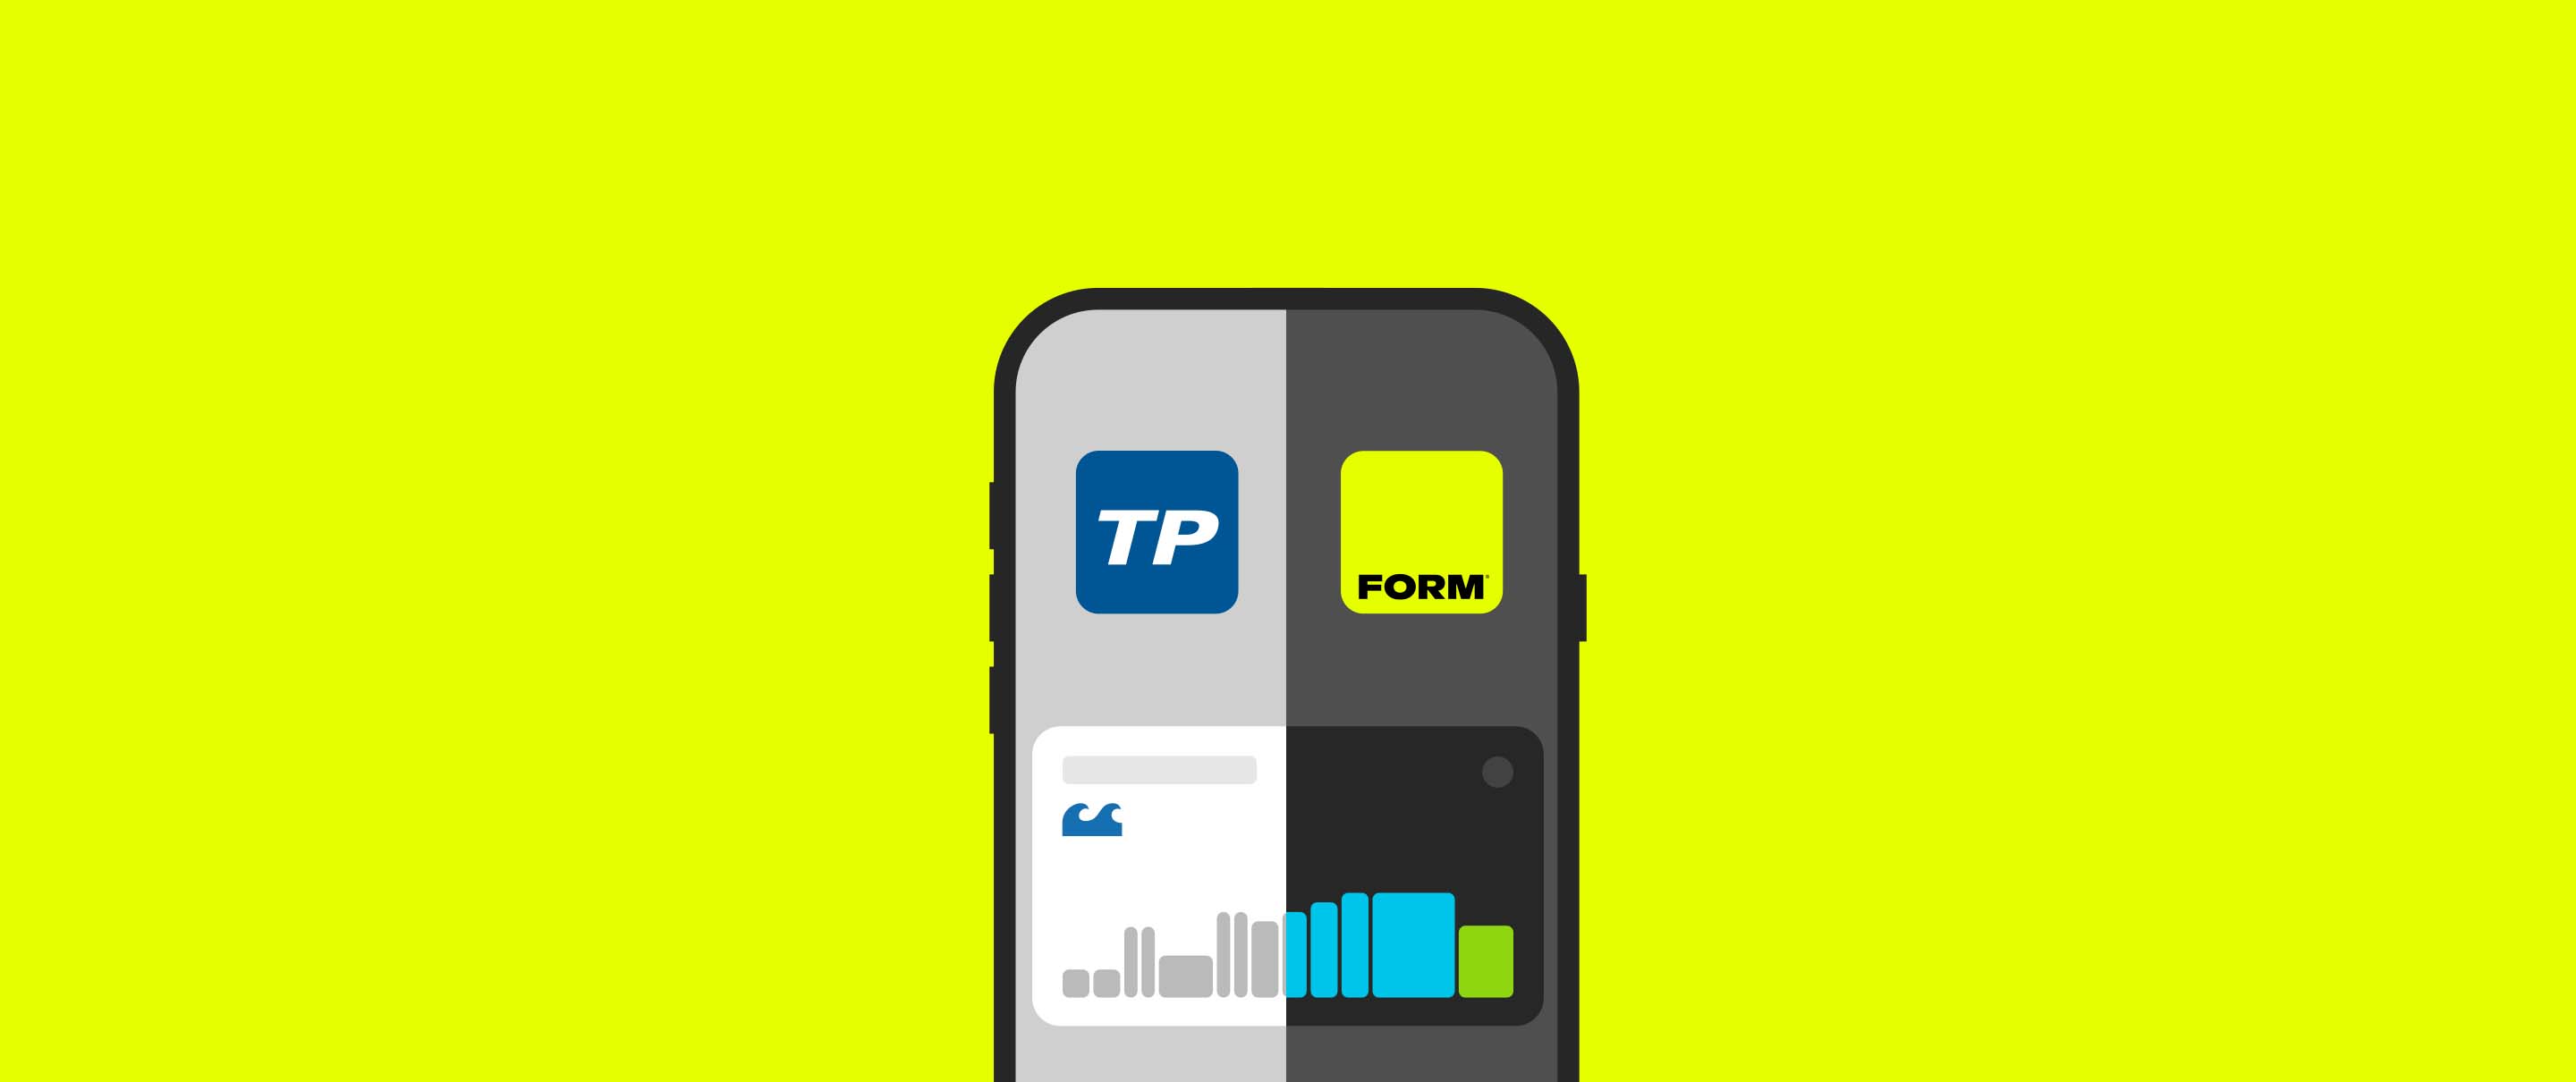 Fitness Technology Company FORM Announces Highly-Anticipated Integration with TrainingPeaks